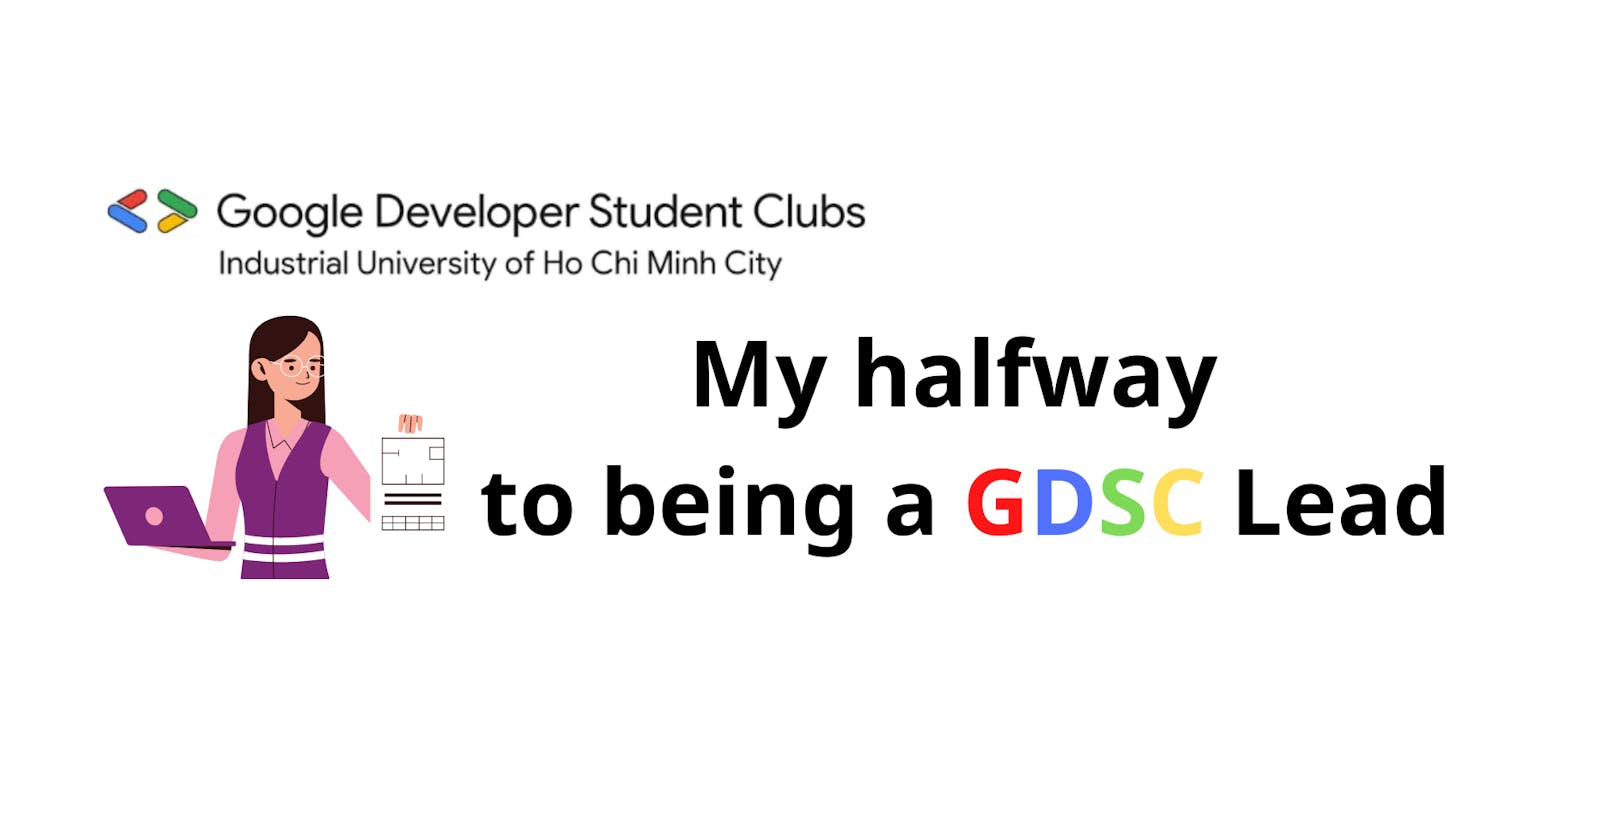 My halfway to being a GDSC Lead